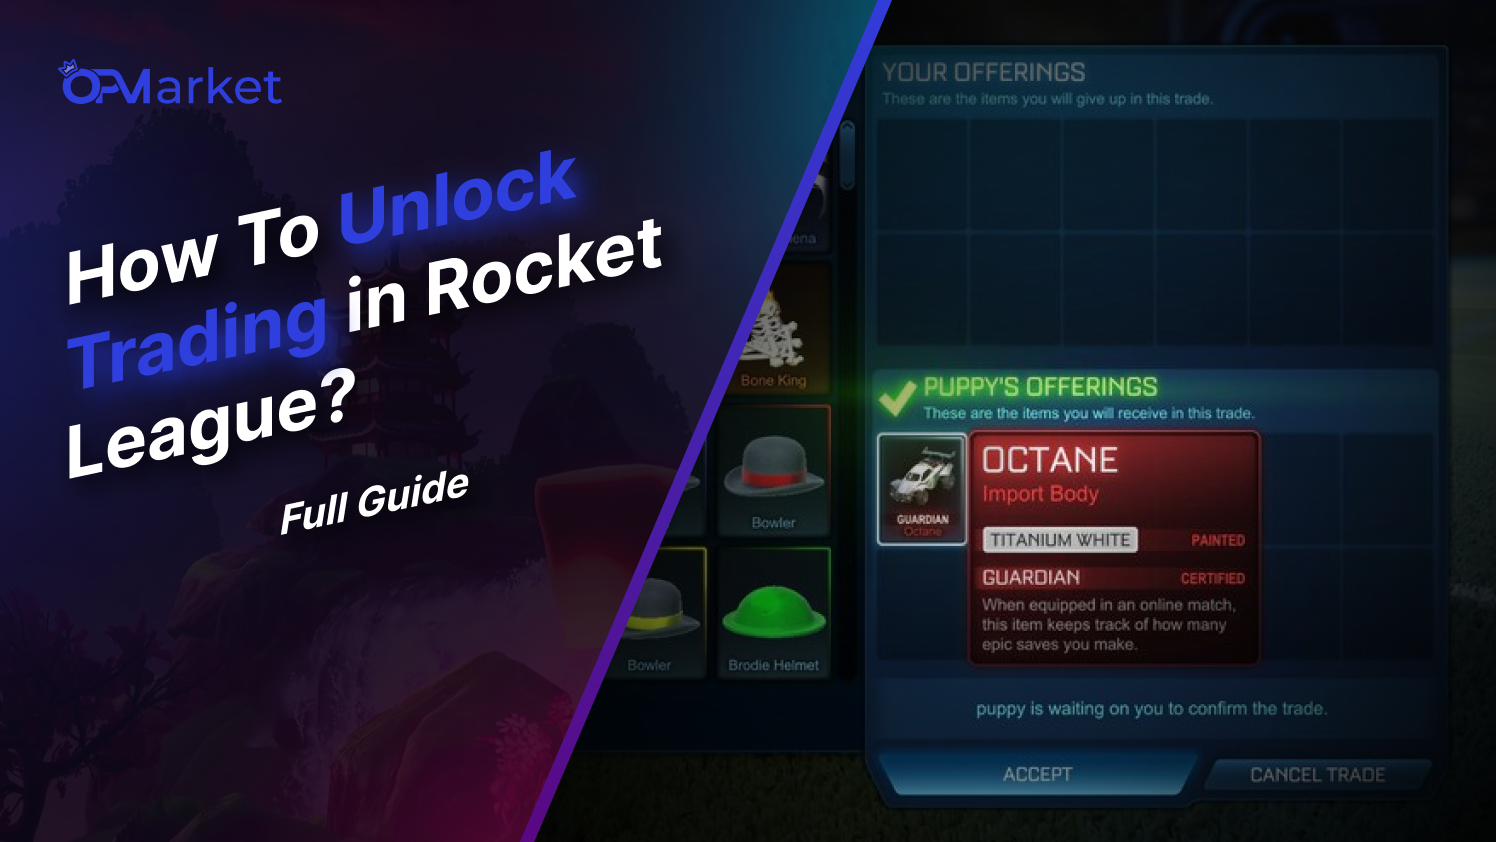 Rocket League 2FA - How to Activate It and Enhance Your Gaming Security